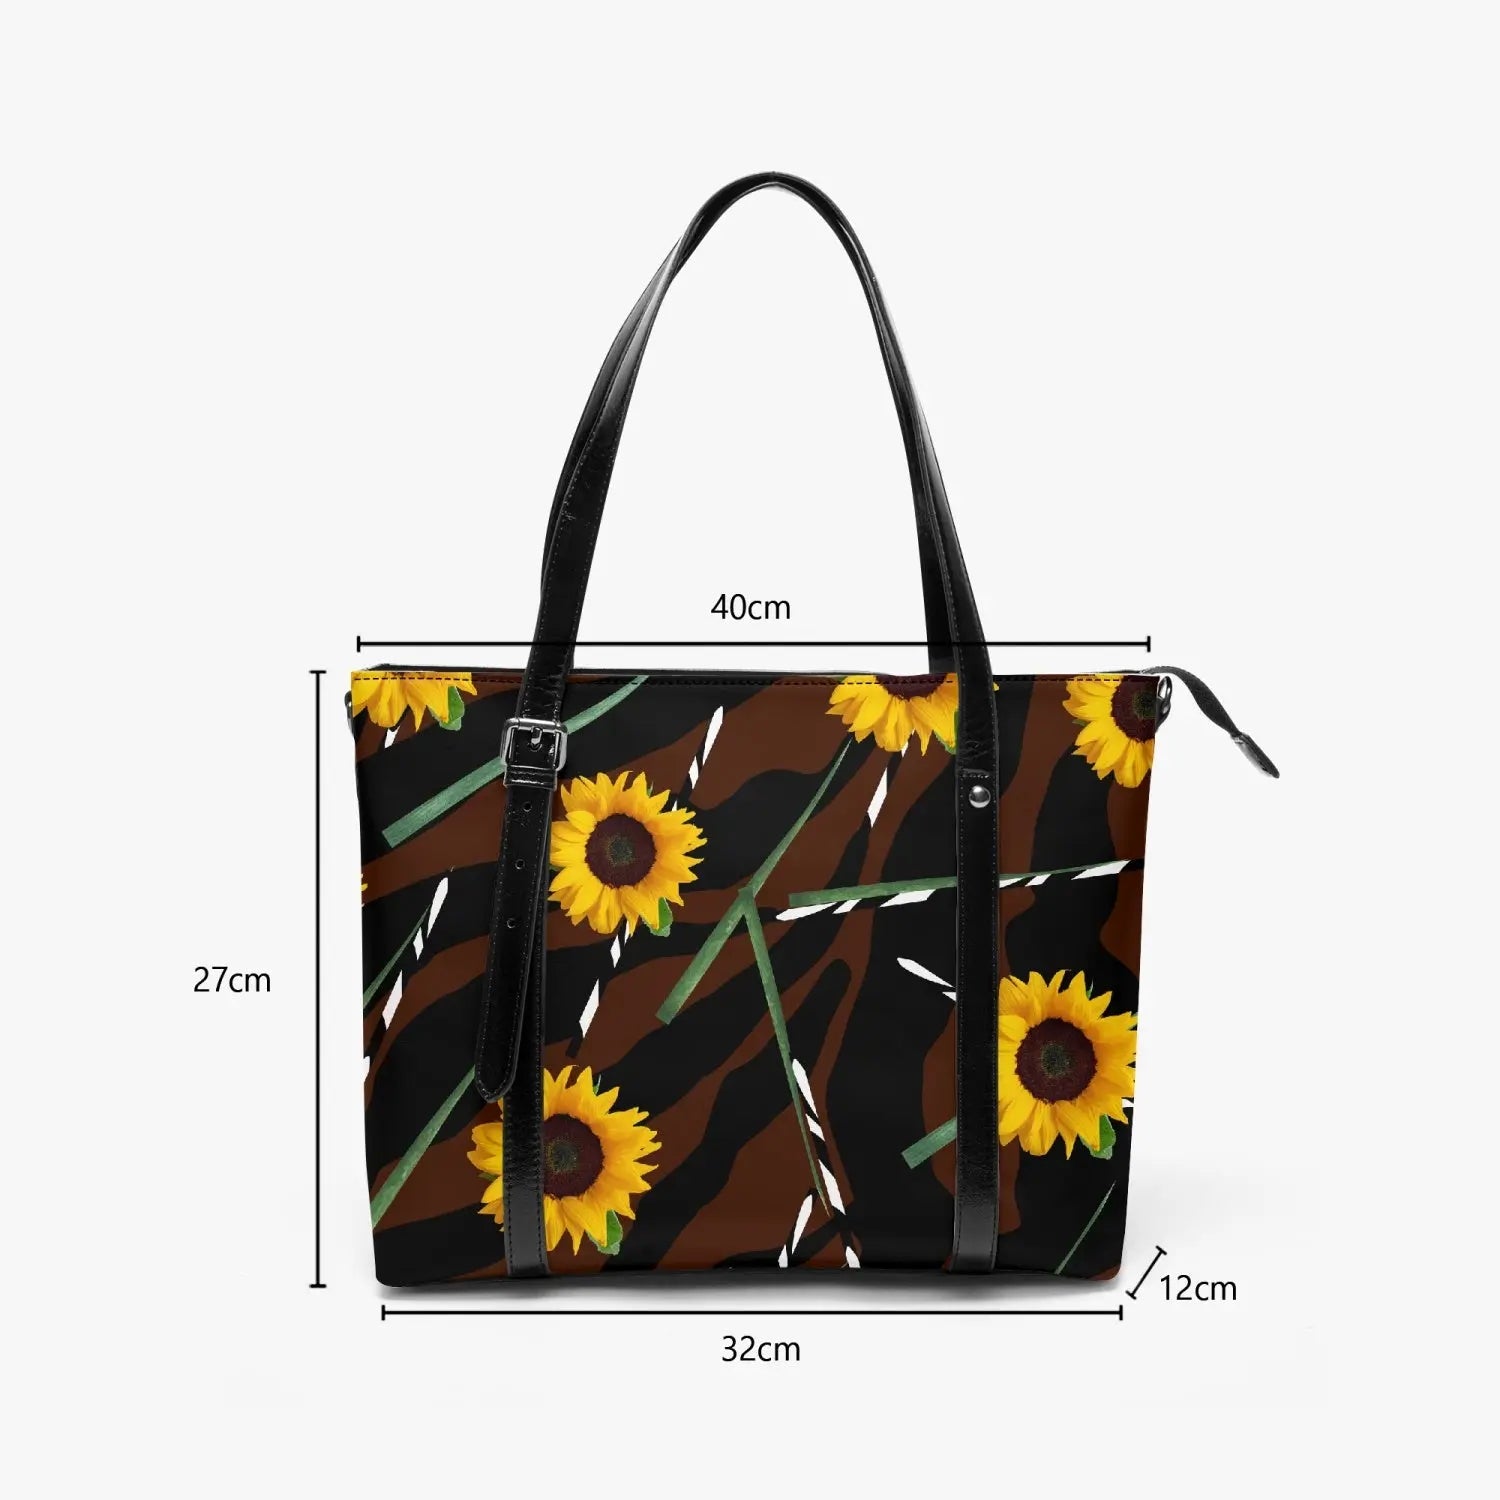 - Sunflower Wild Stripe-around Women's Purse Tote Bag - New Arrival at TFC&H Co.